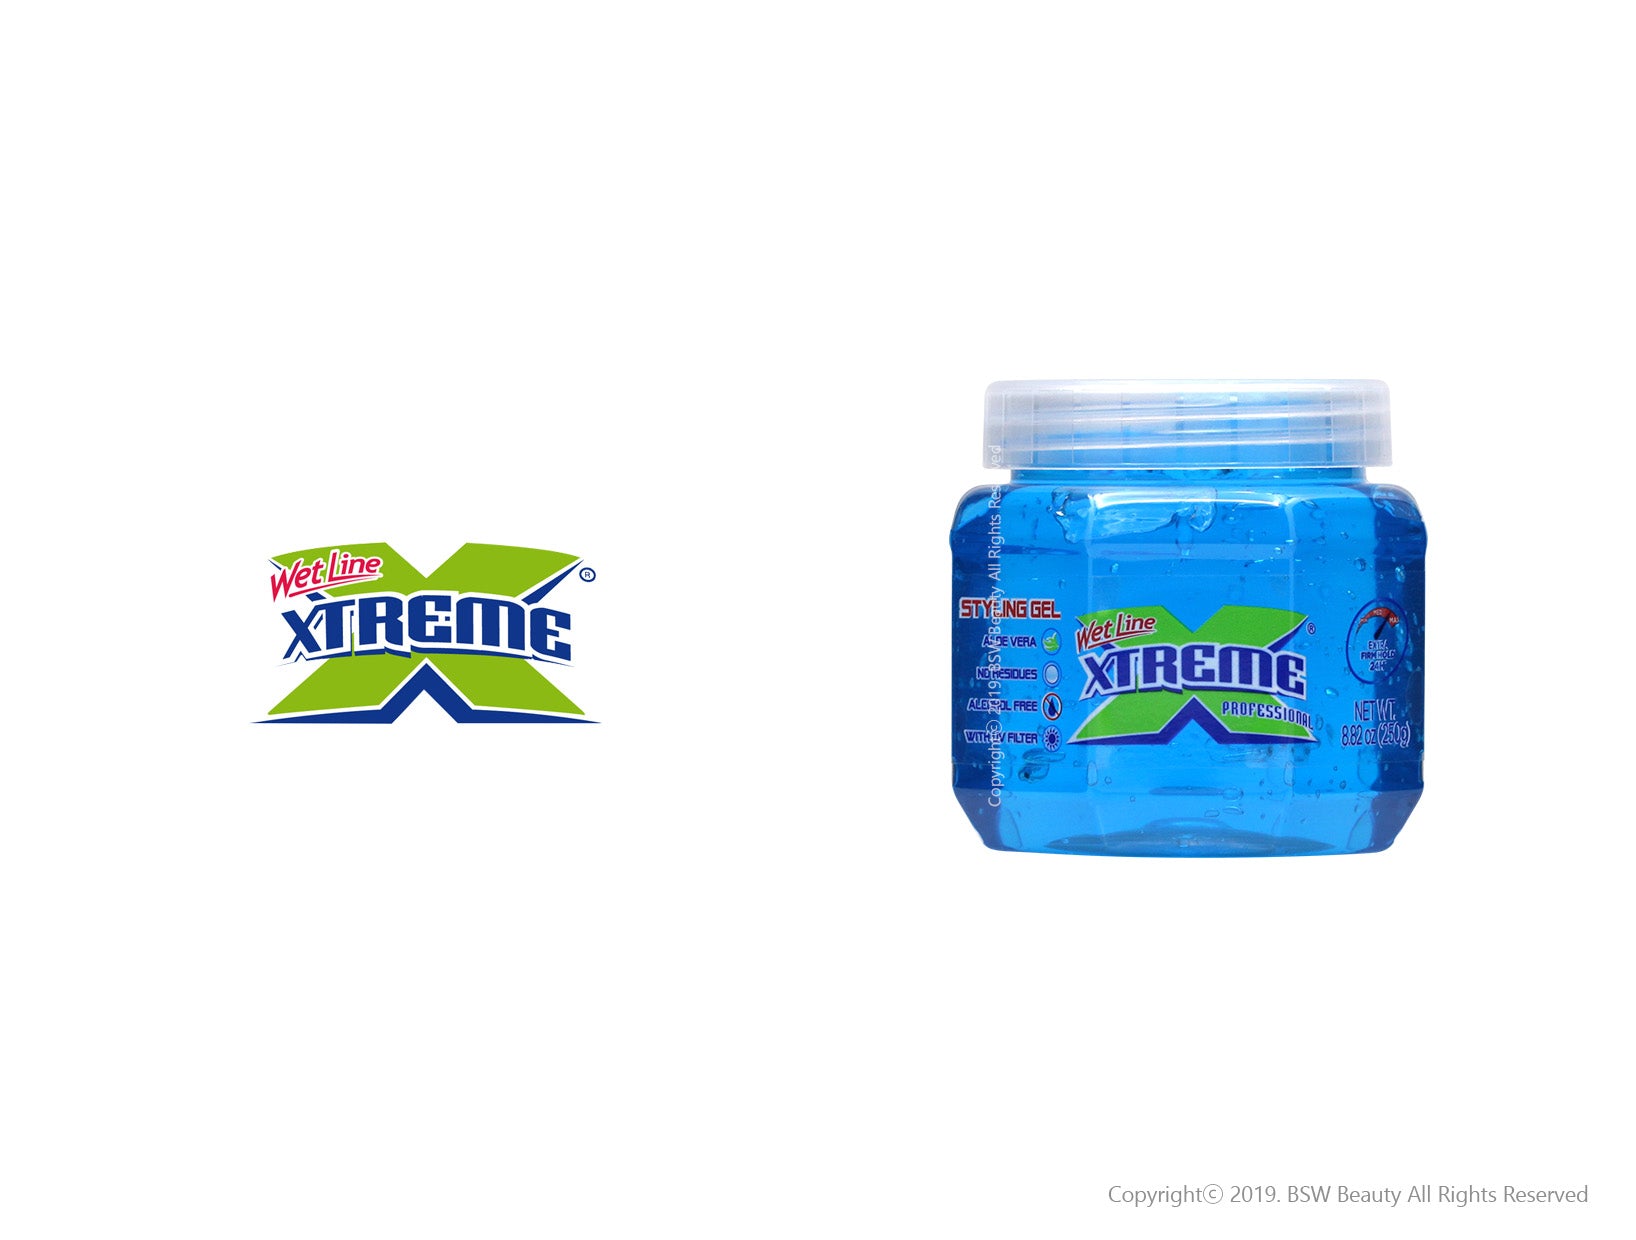  Xtreme Professional Wet Line Styling Gel Extra Hold Blue,  35.26 oz : Hair Styling Gels : Beauty & Personal Care